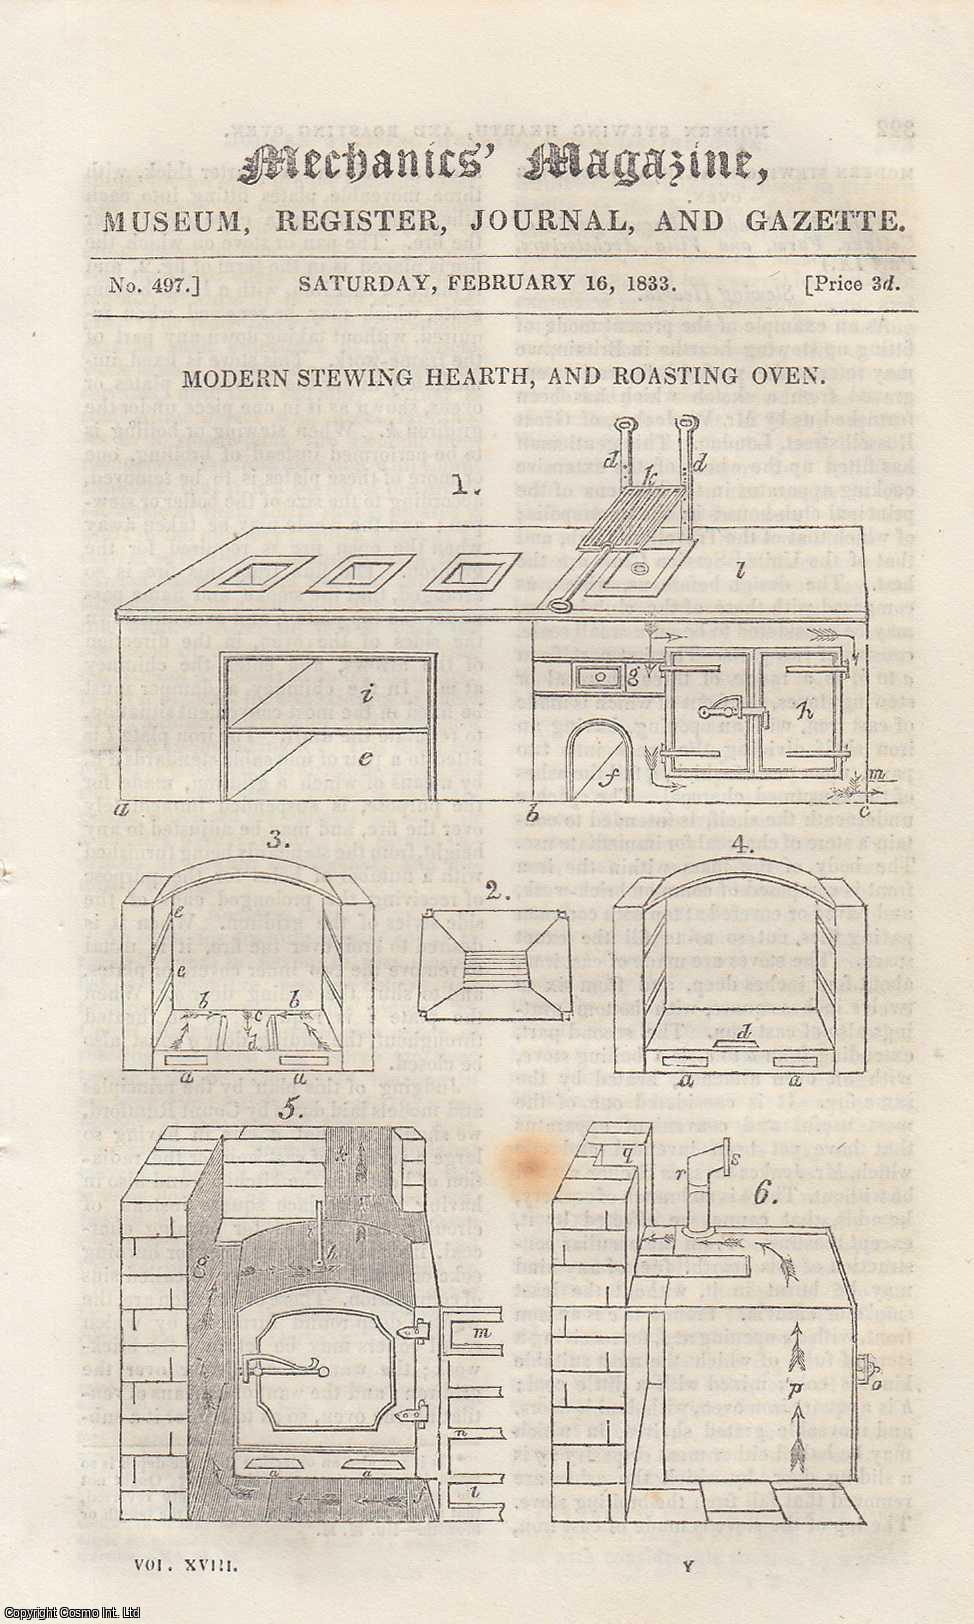 Mechanics Magazine - Modern Stewing Hearth, & Roasting Oven; Mr. Hall's Improvements in Steam-Engines; Carriages & Carriage-Builders; A Thought on Conflagrations of Dwelling-Houses, etc. Mechanics Magazine, Museum, Register, Journal and Gazette. Issue No. 497. A complete rare weekly issue of the Mechanics' Magazine, 1833.